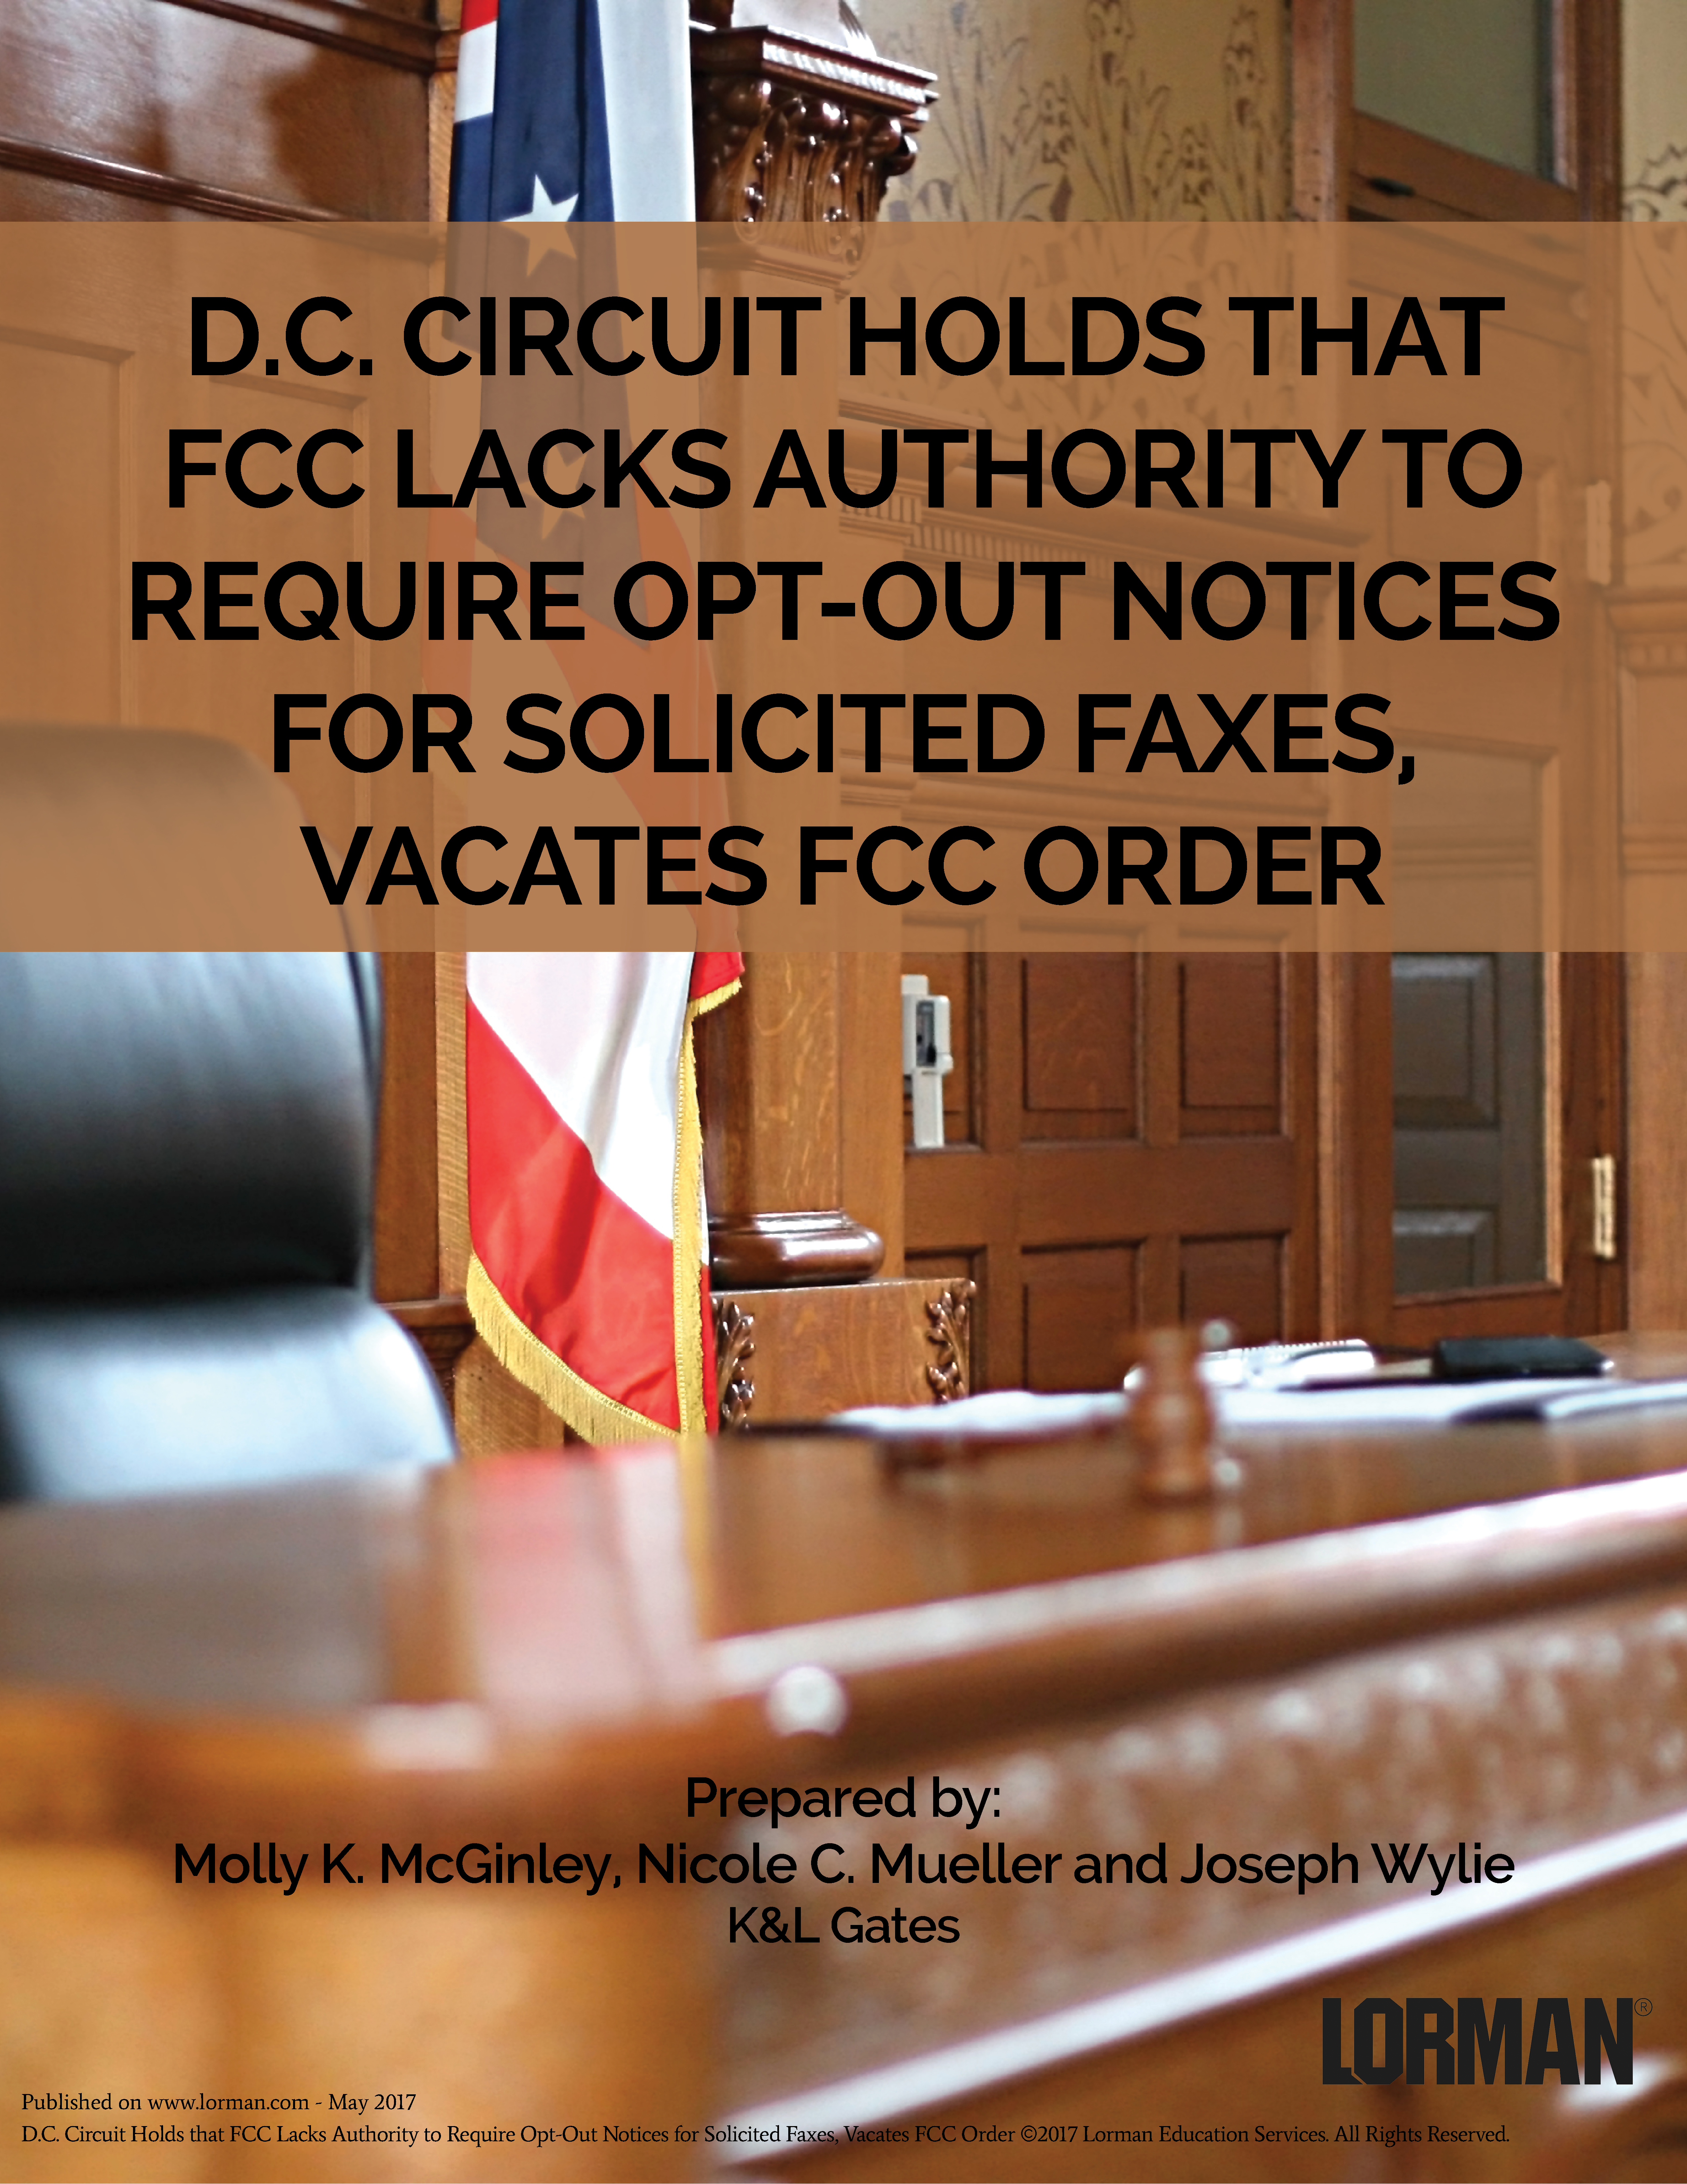 D.C. Circuit: FCC Lacks Authority to Require Opt-Out Notices for Solicited Faxes, Vacates FCC Order